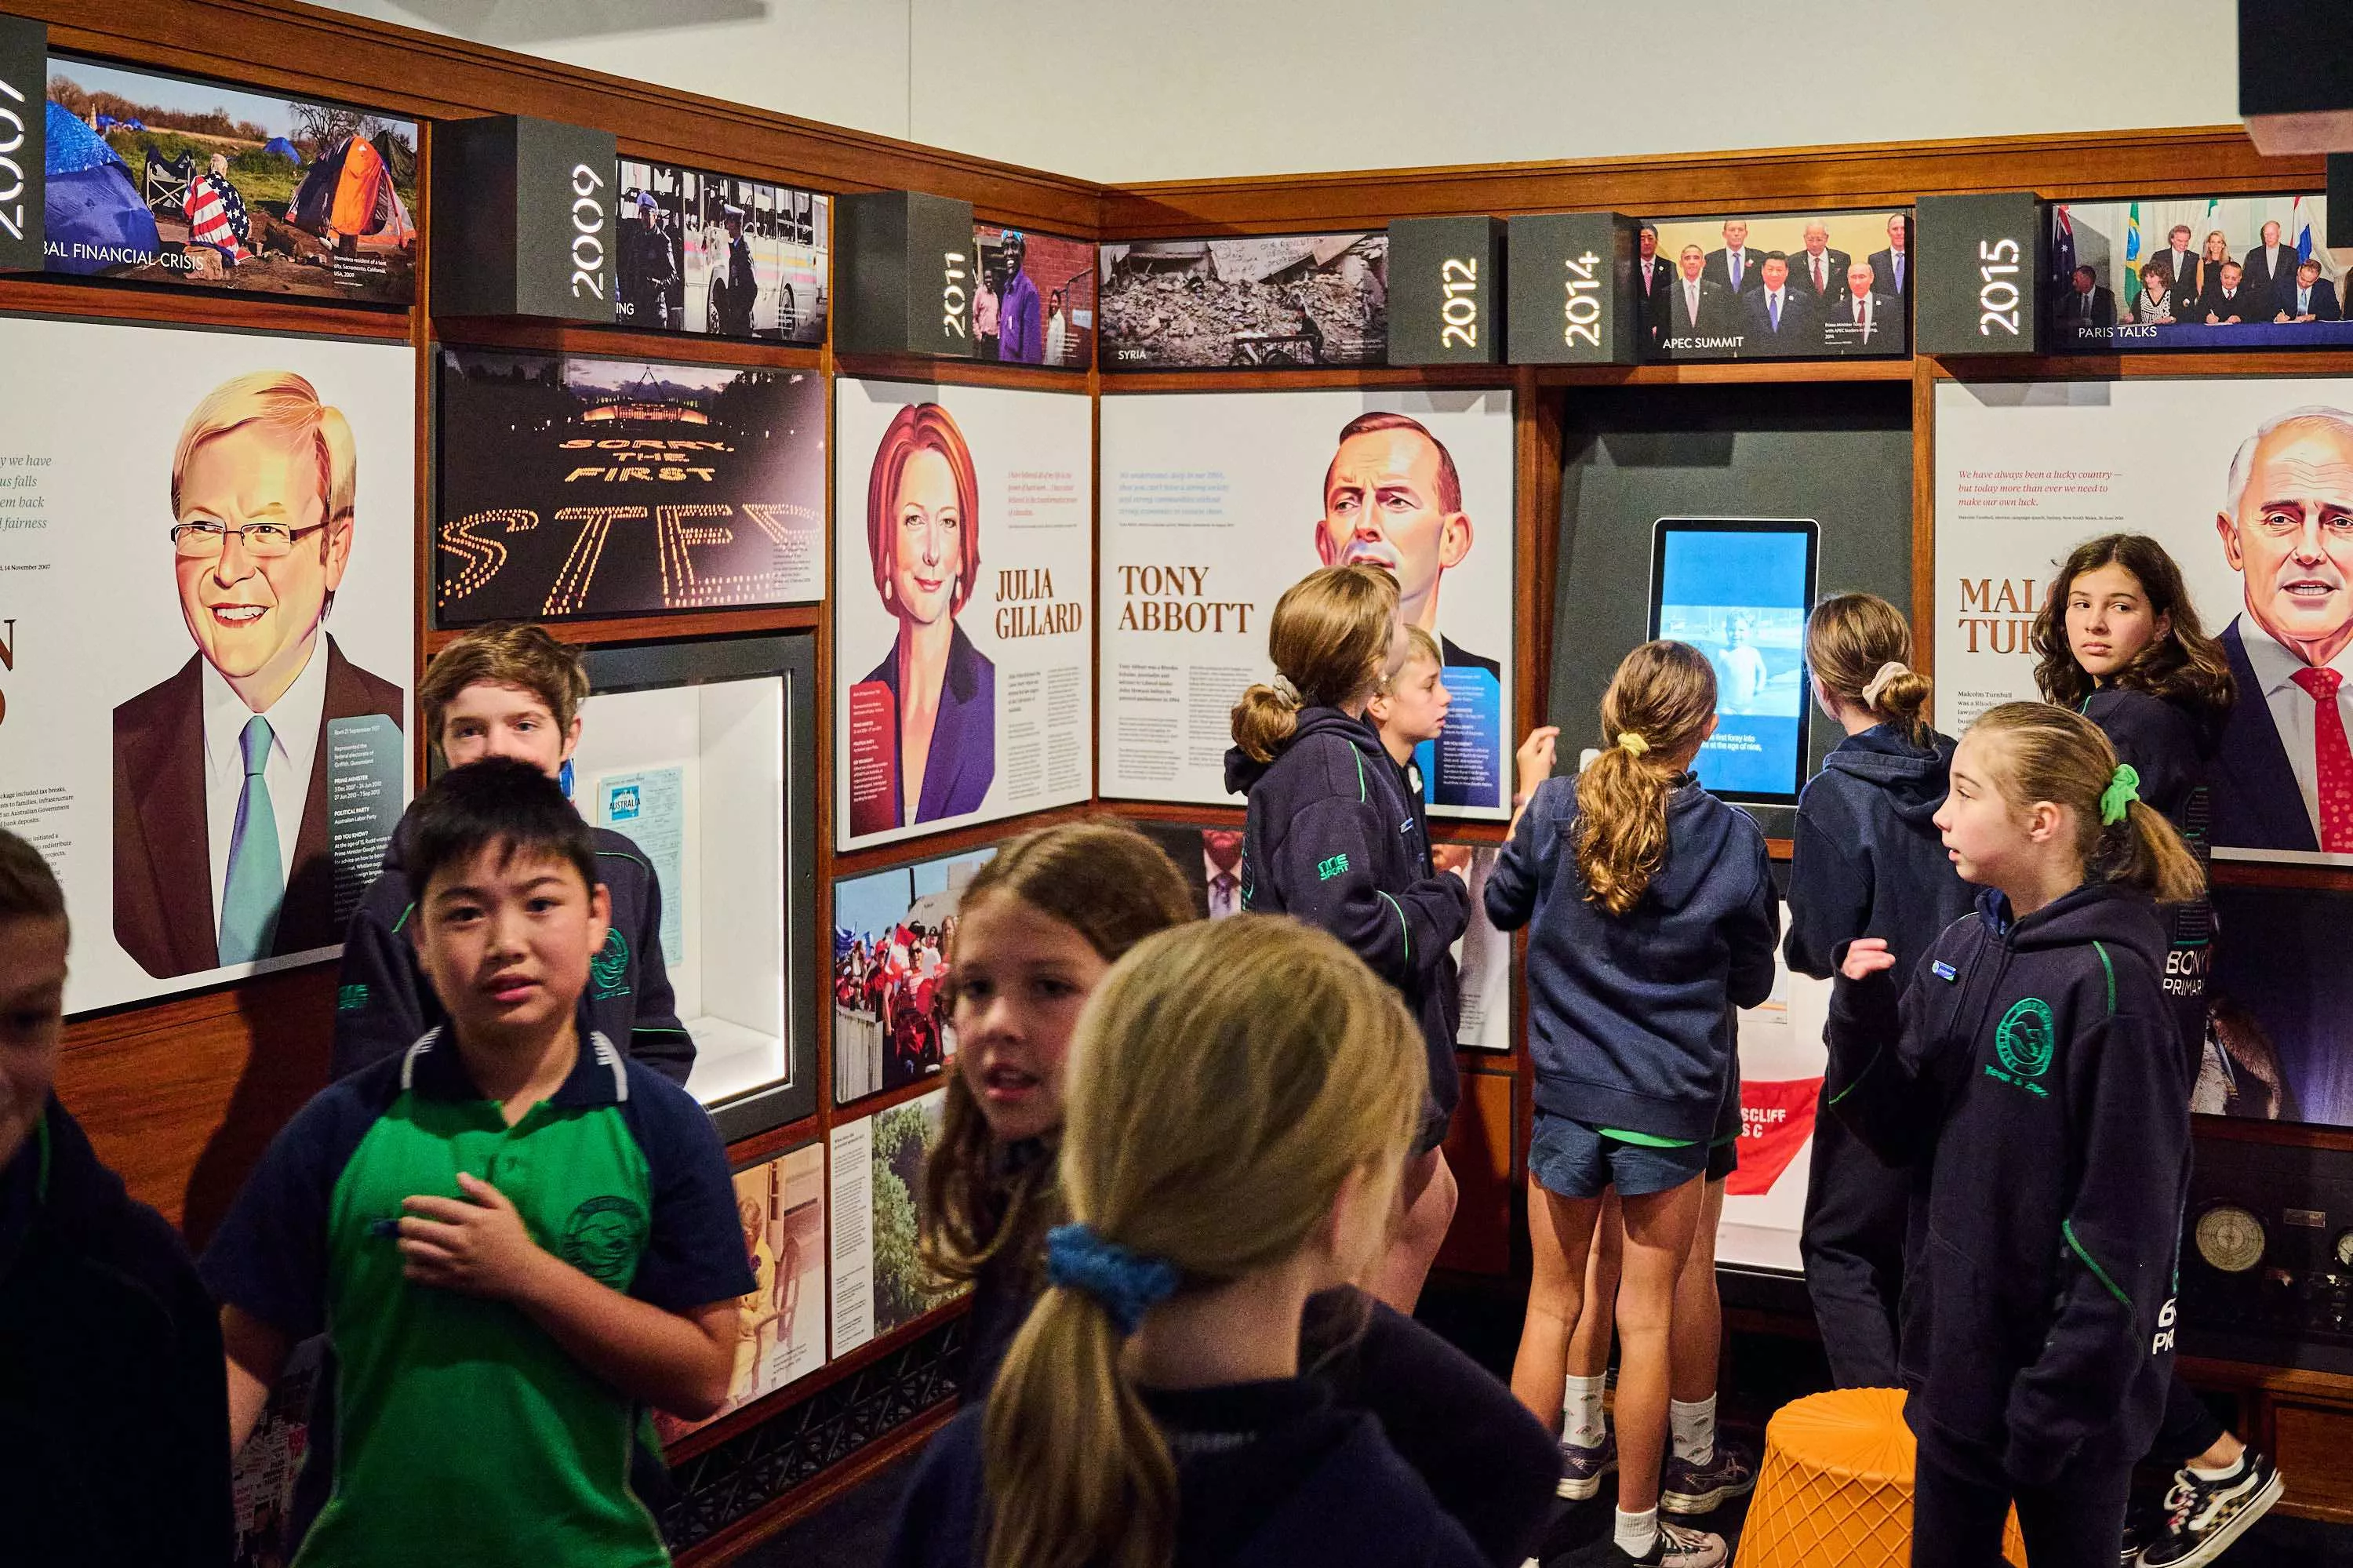 Primary school students look around the exhibits in the Democracy DNA exhibition featuring panels of prime ministers including Kevin Rudd and Julia Gillard. 